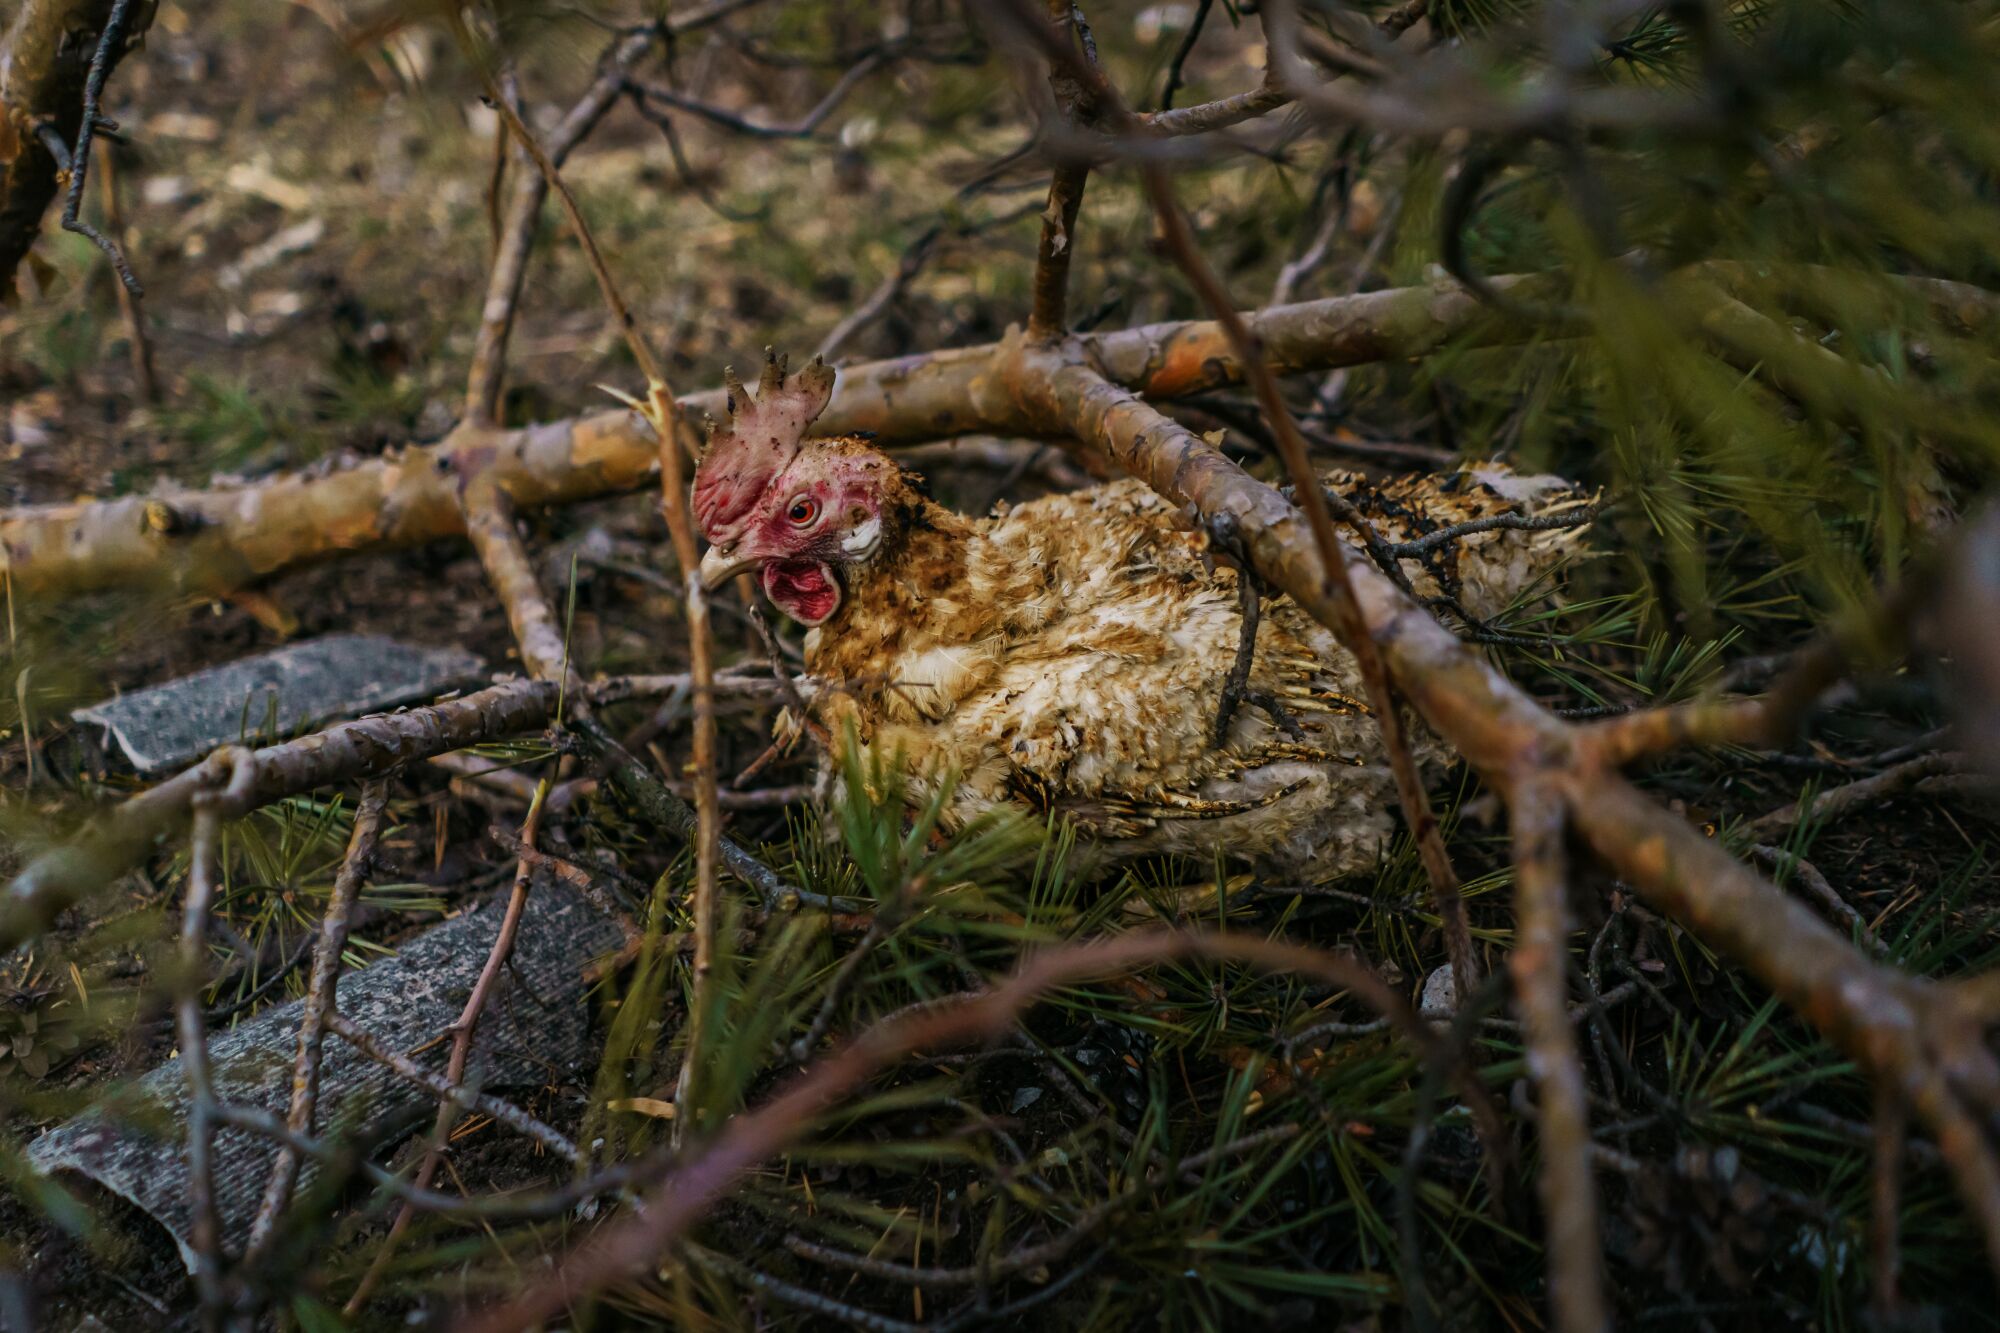 A chicken with singed feathers rests under a bush.